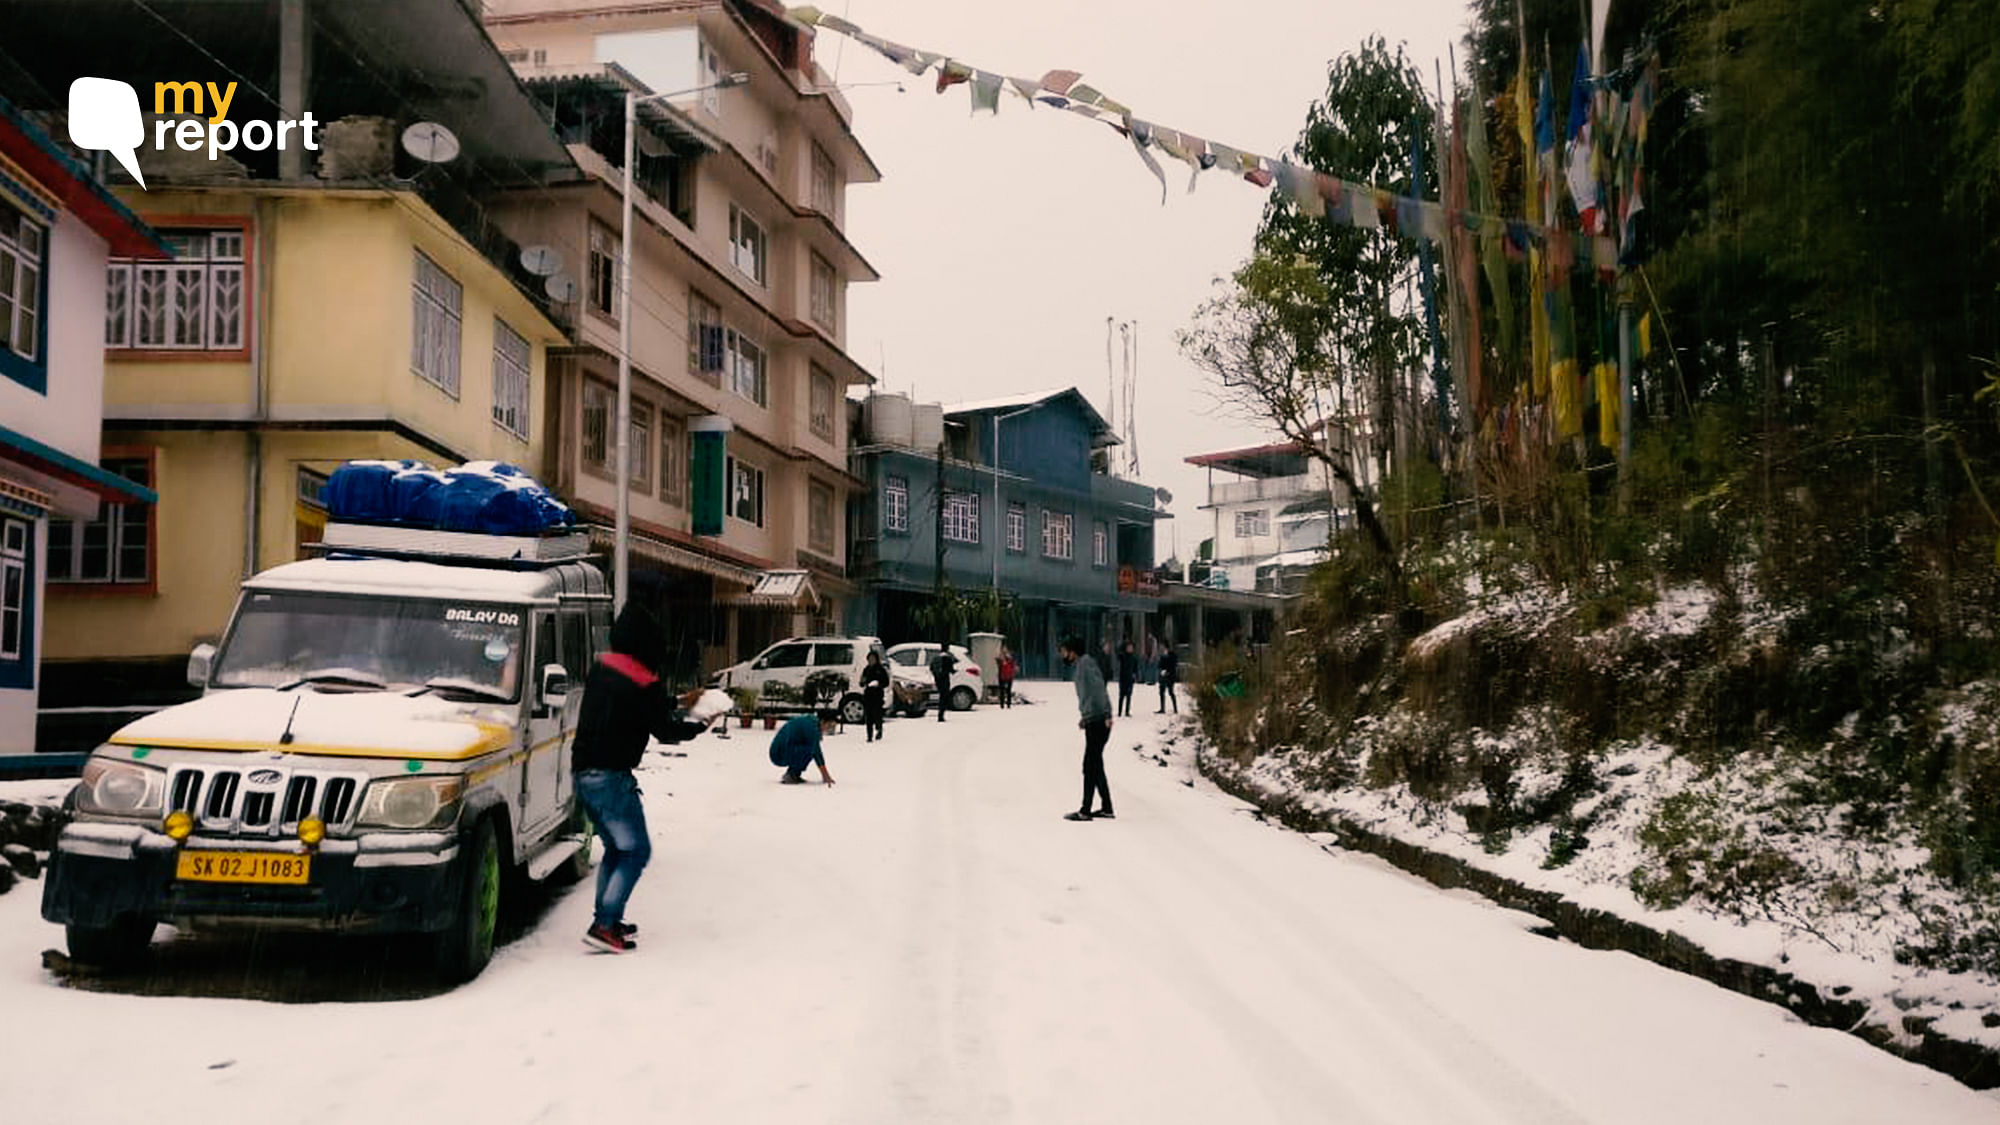 Sikkim and Darjeeling enjoy some snow flakes after 10 years.